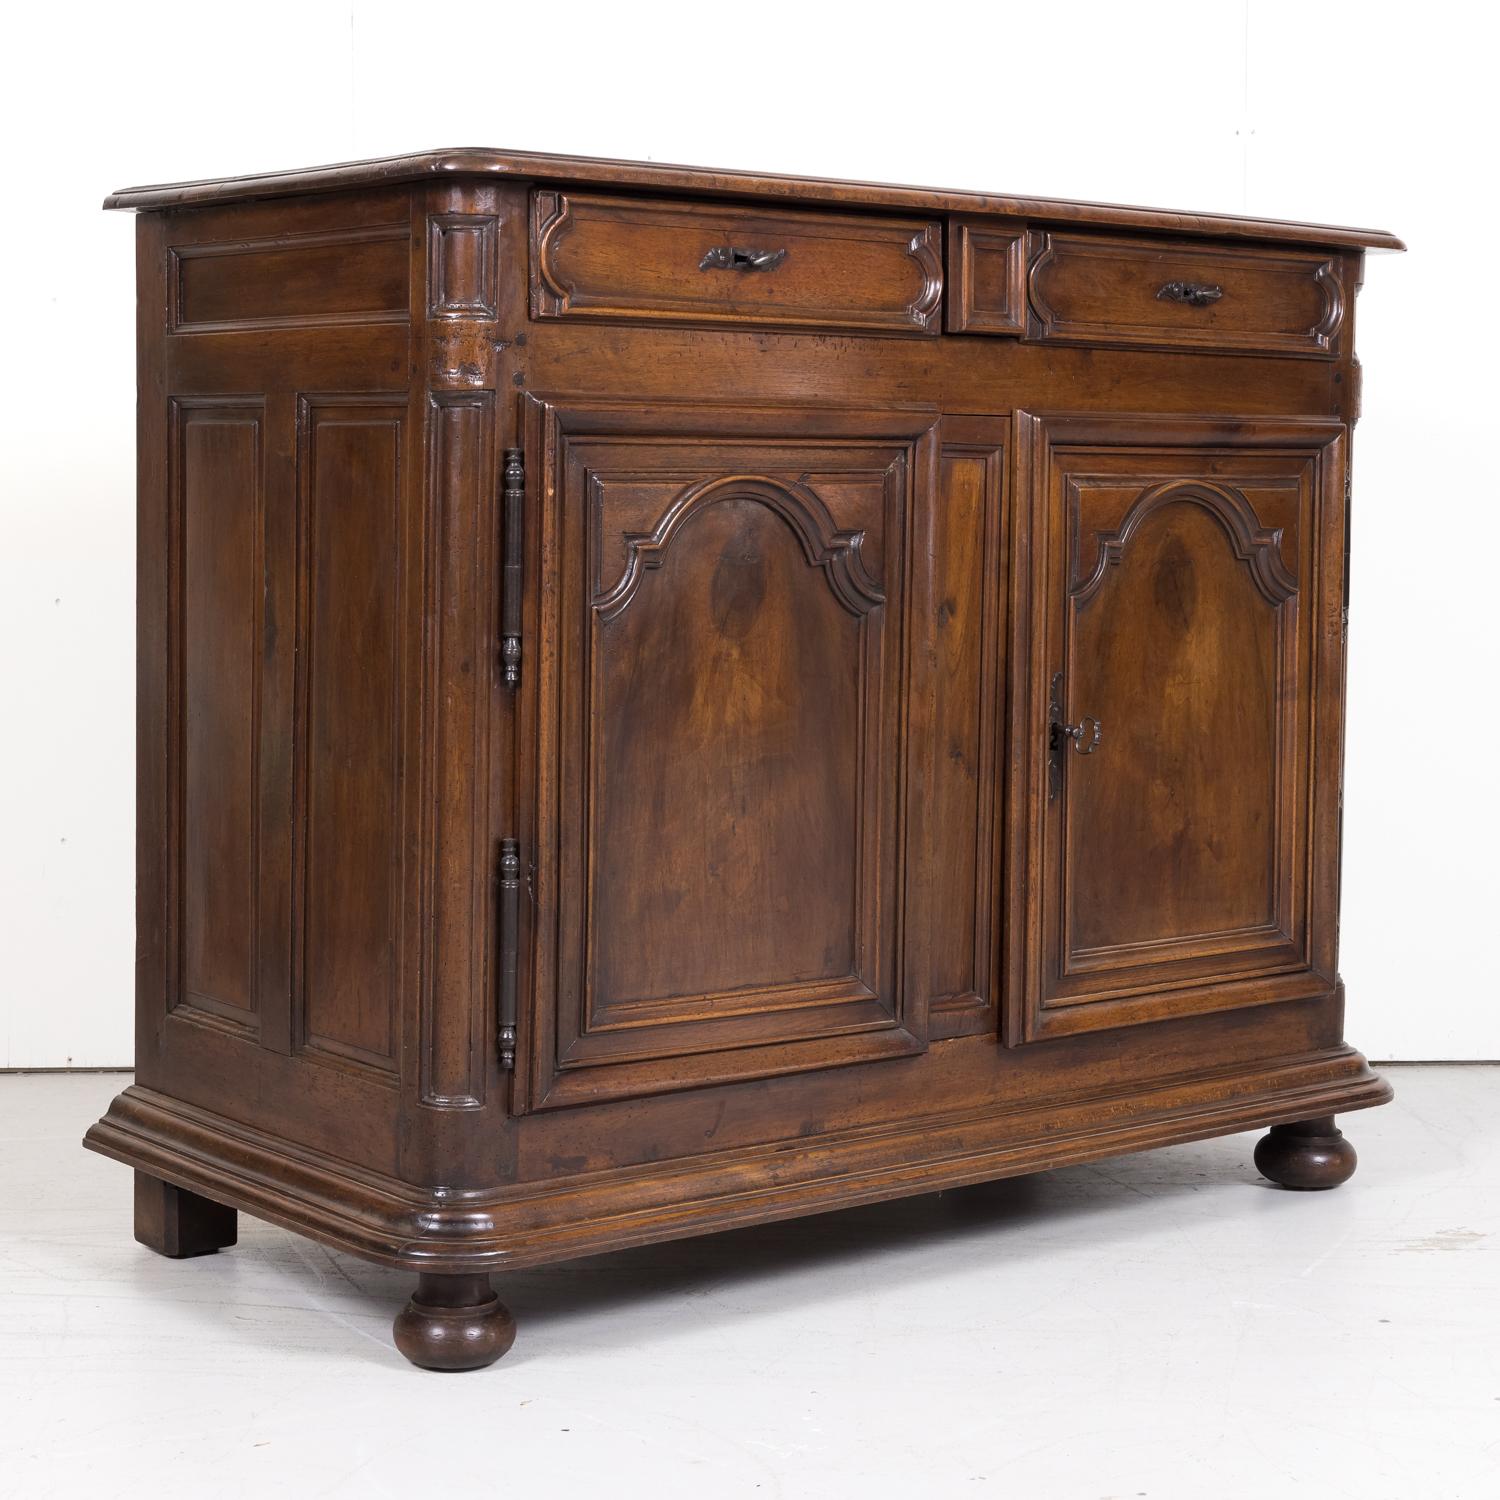 A beautiful 18th century French period Louis XIV buffet handcrafted by talented artisans in Lyon of solid walnut, circa 1700. Having a beveled, rounded edge plank top above two large raised, molded panel drawers with a secret center drawer over two